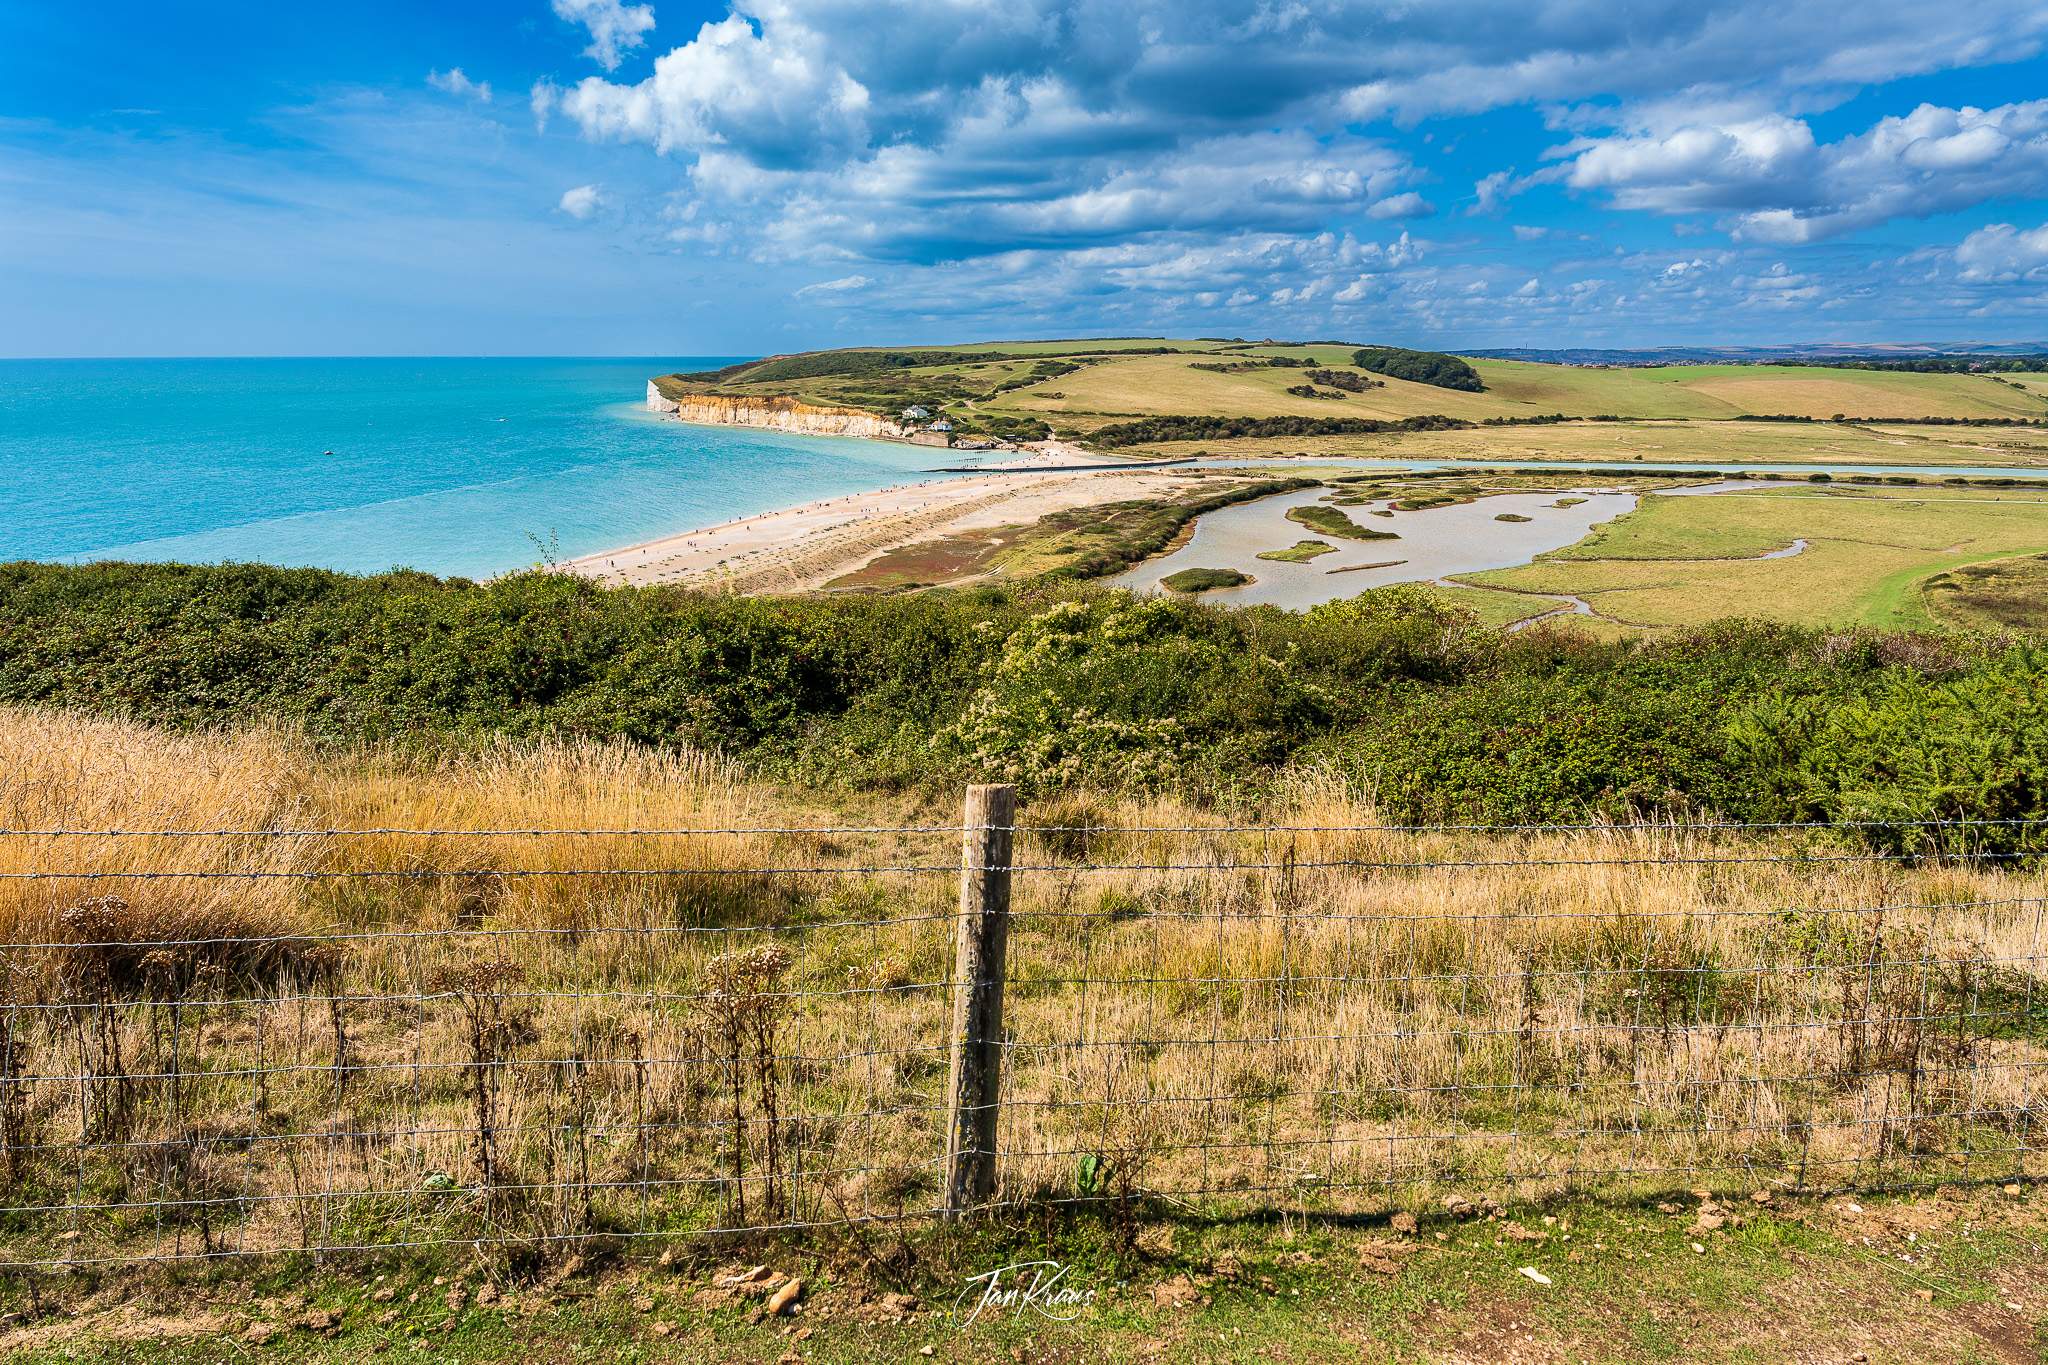 A view of the Cuckmere Haven and its beach at the Seven Sisters Walk, East Sussex, England, UK